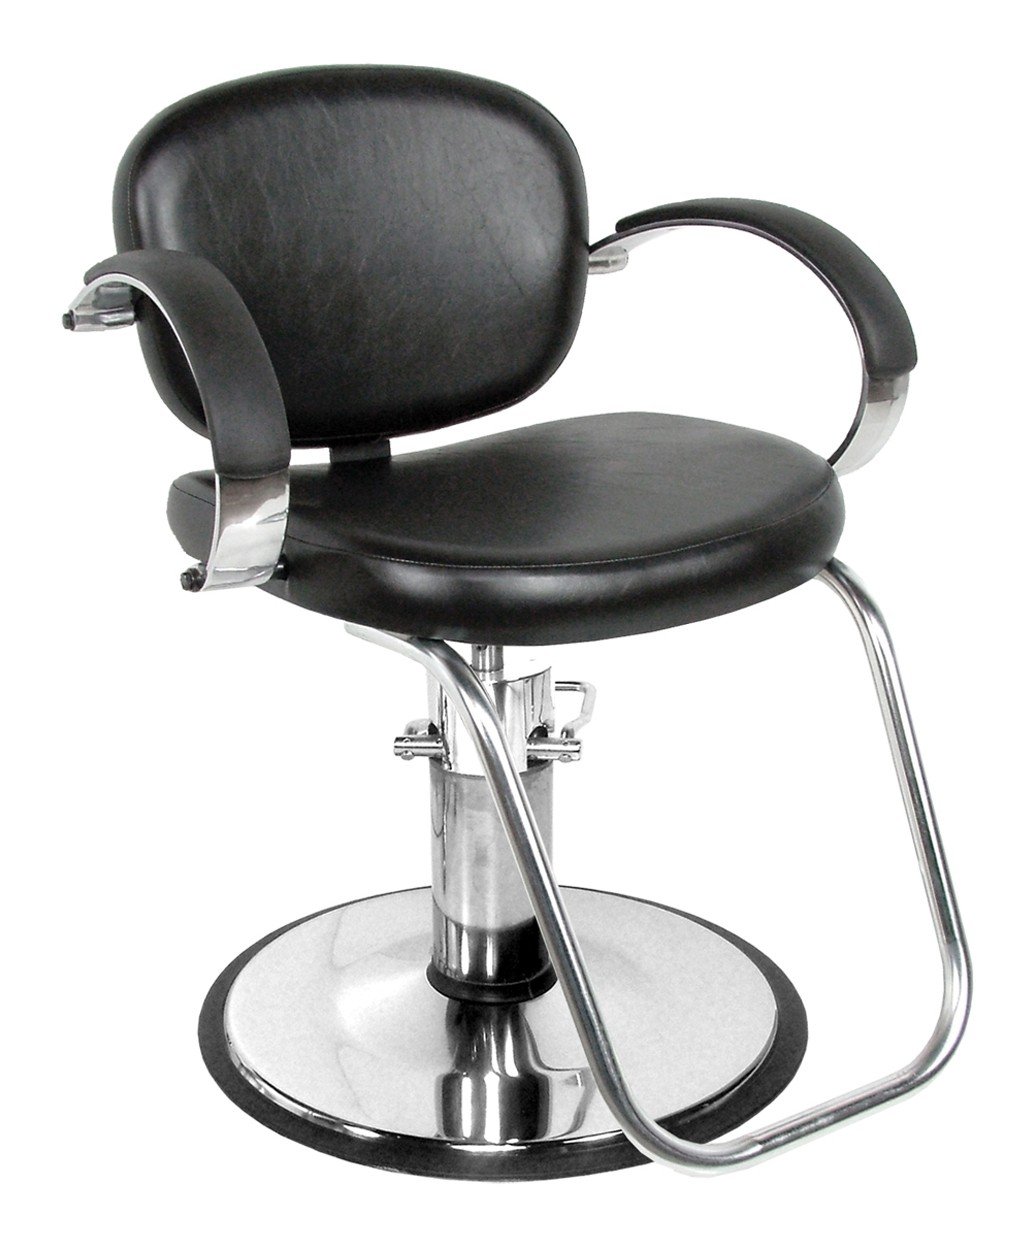 Collins QSE 1300 Valenti Styling Chair